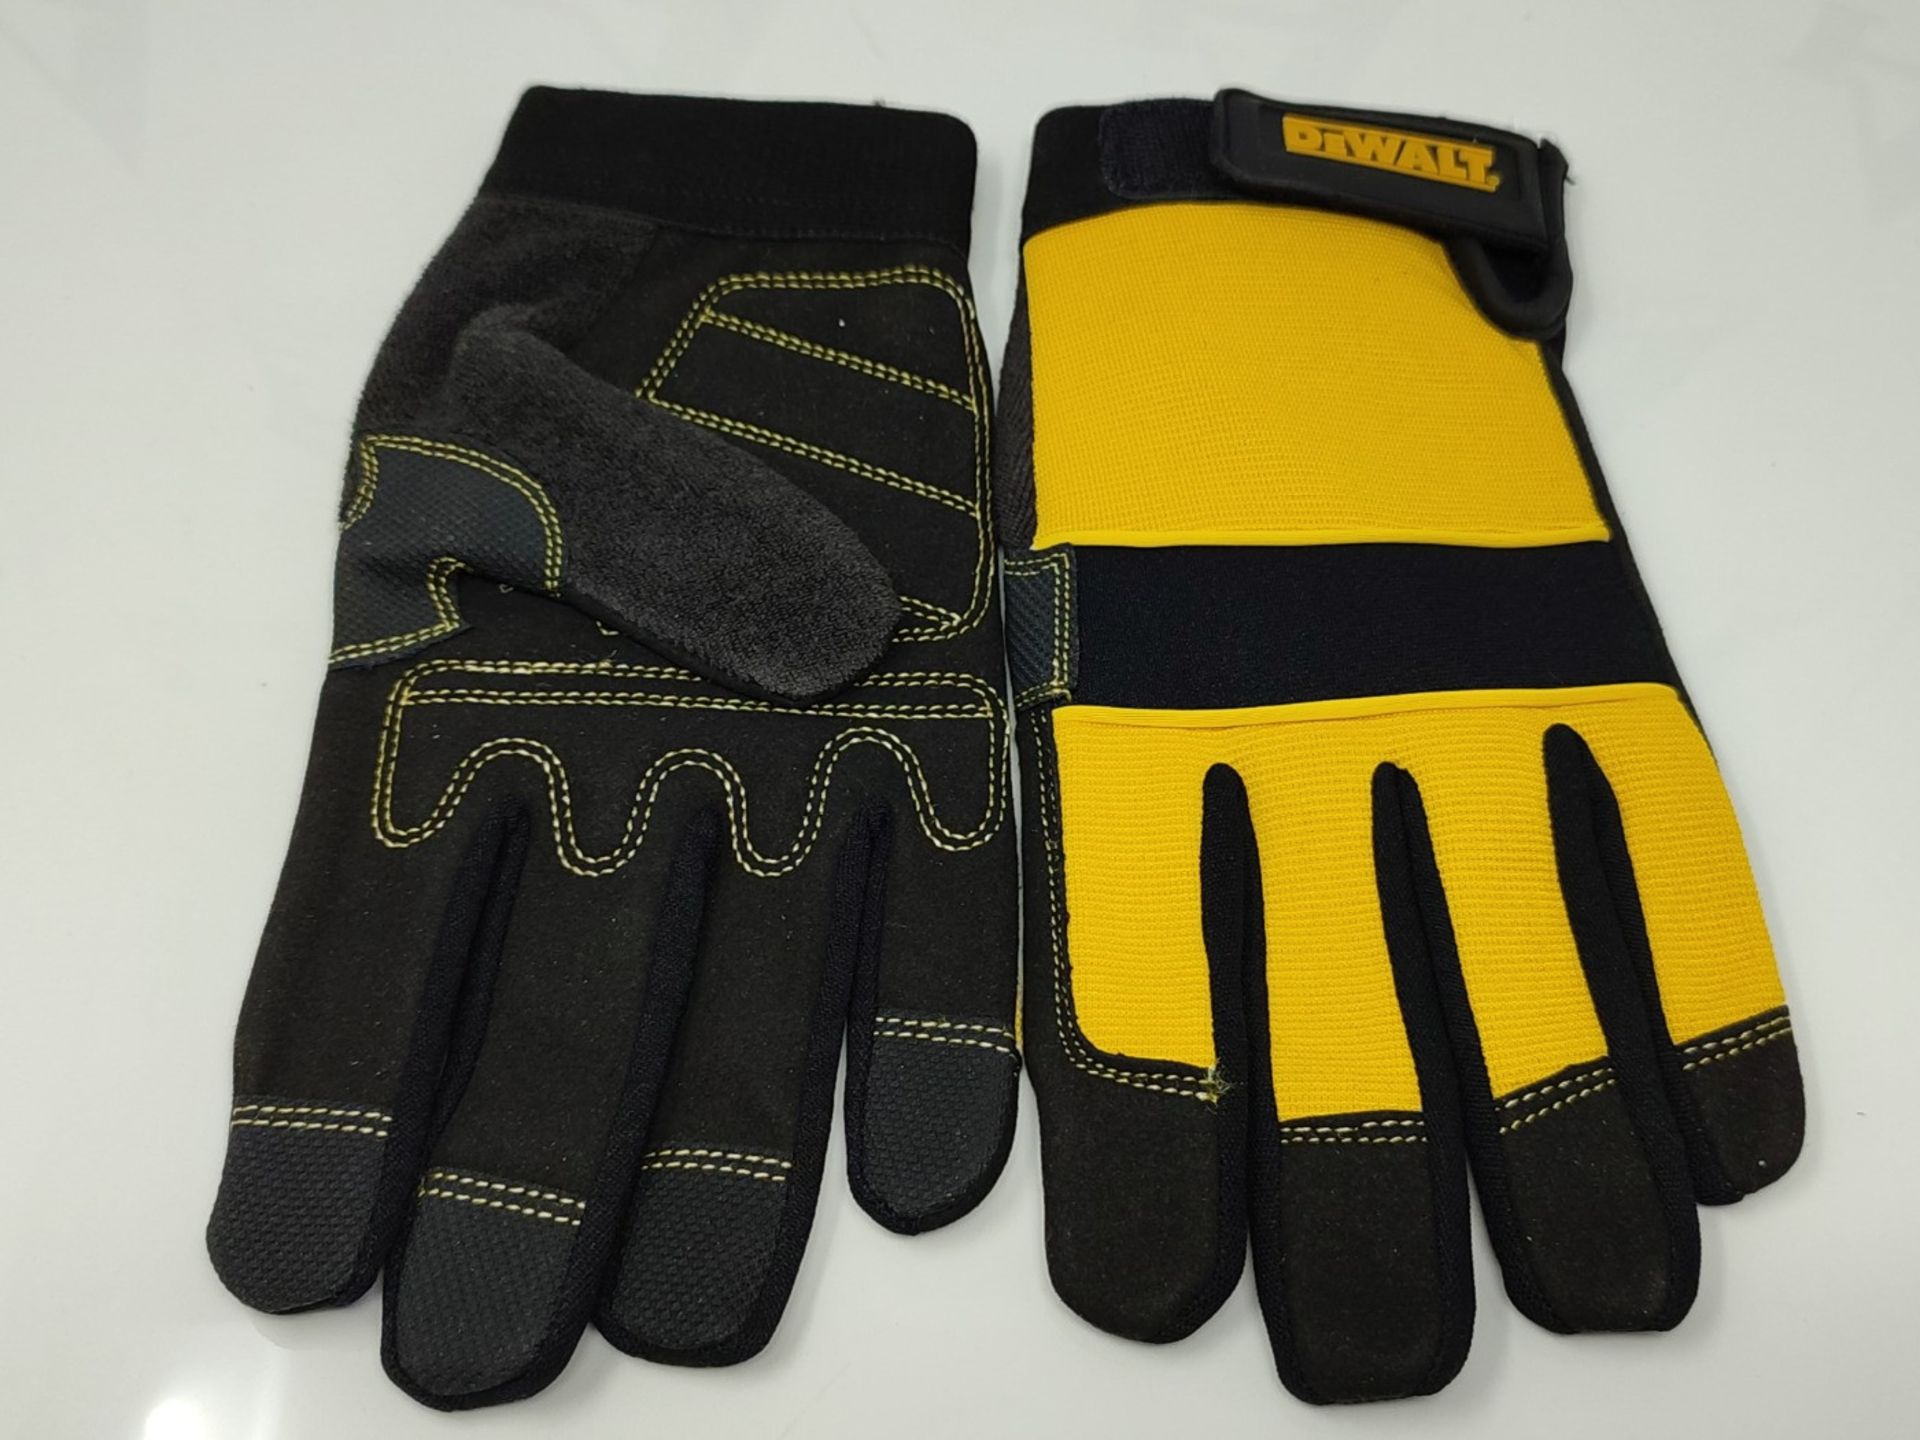 DEWALT Men's - Synthetic Padded Leather Palm Gloves Large, Black/Yellow, L (1 pair) - Image 2 of 2